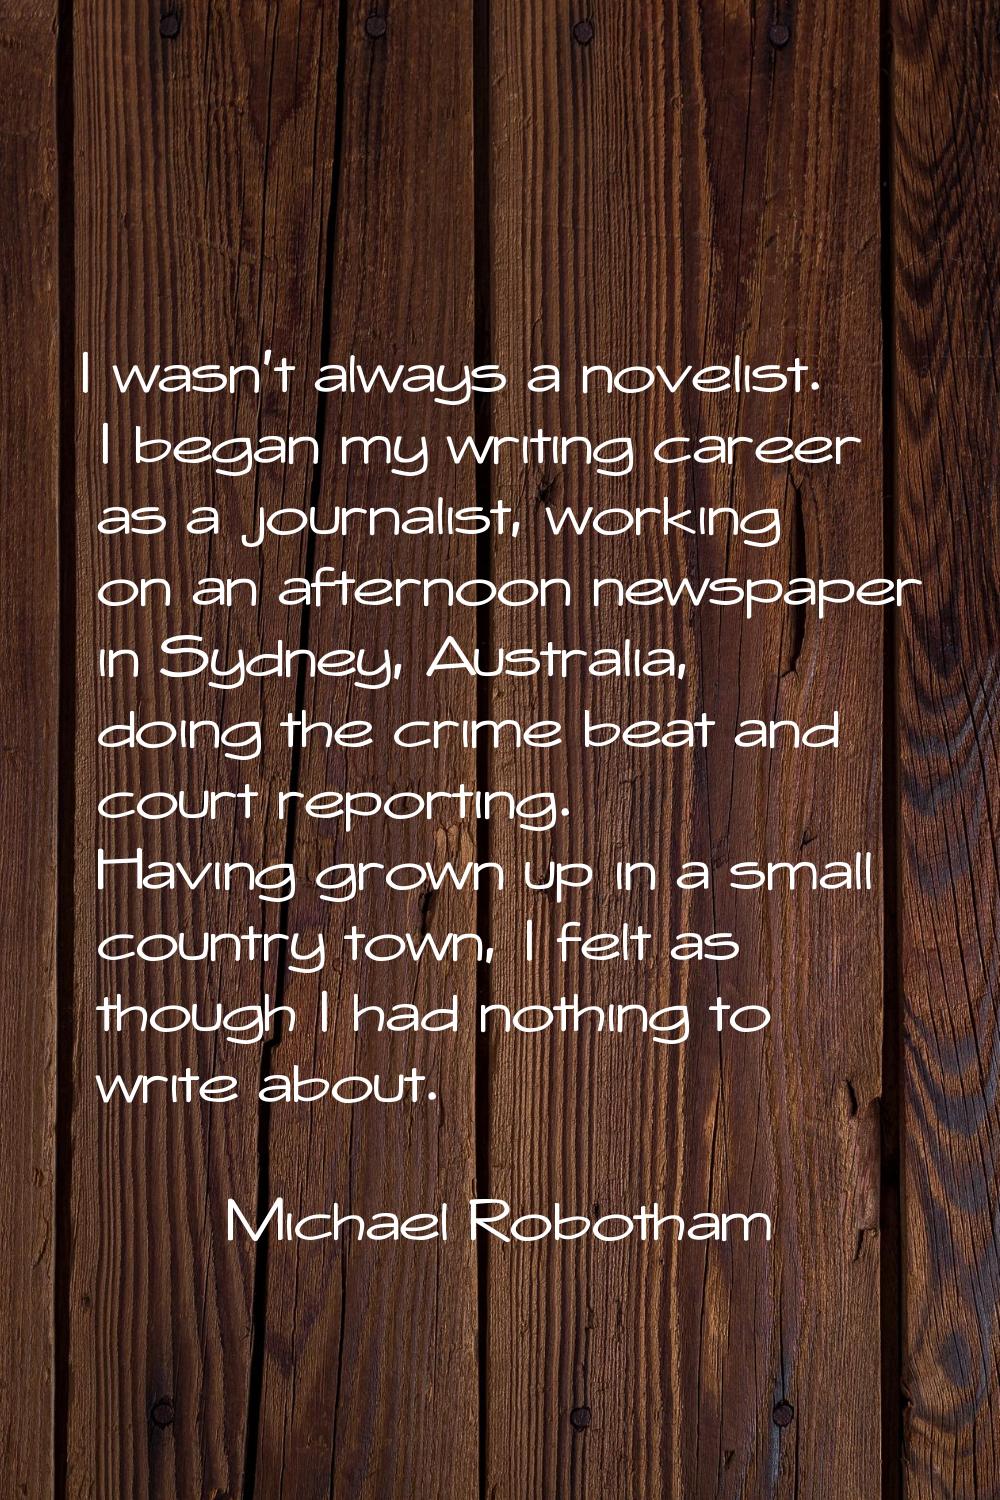 I wasn't always a novelist. I began my writing career as a journalist, working on an afternoon news